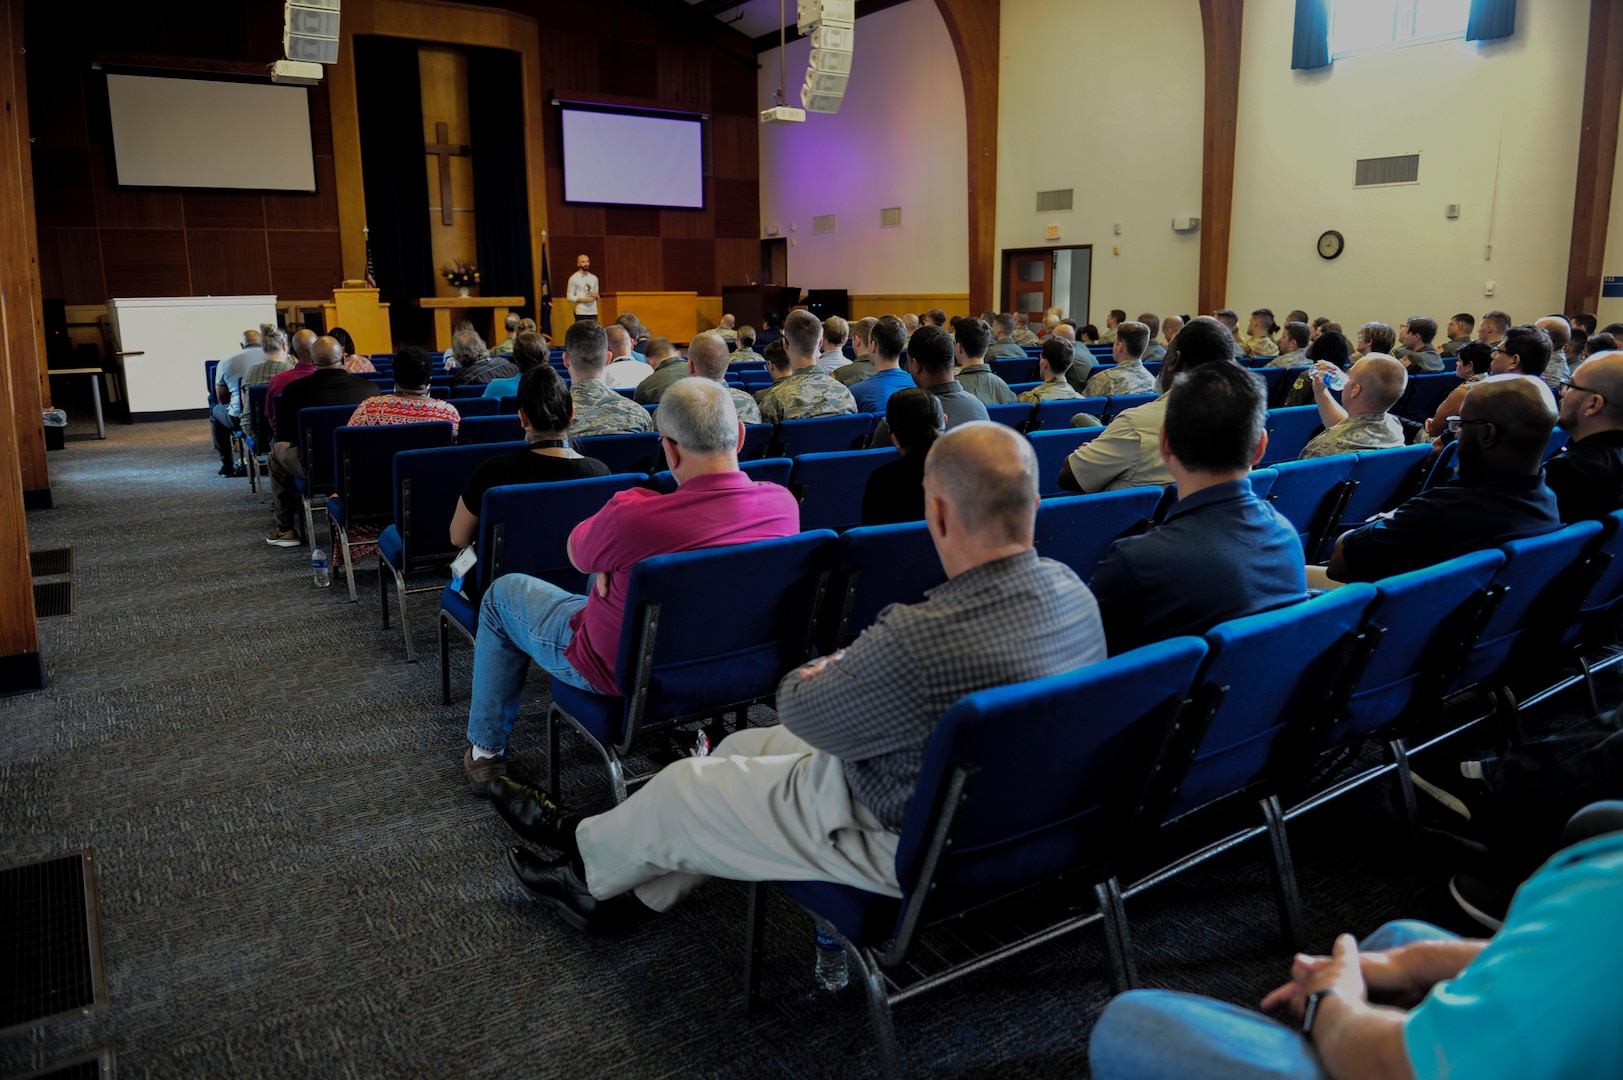 Joint Base San Antonio members gather inside the Religious Activity Center at JBSA-Randolph Sept. 10, 2019, to listen to Andrew O’Brien, an Iraq War veteran, share his story about overcoming a brutal childhood, testifying against his mother during her murder trial and attempting to end his own life. The Randolph mental health clinic invited O’Brien to share his experience as part of Suicide Awareness and Prevention Month activities.